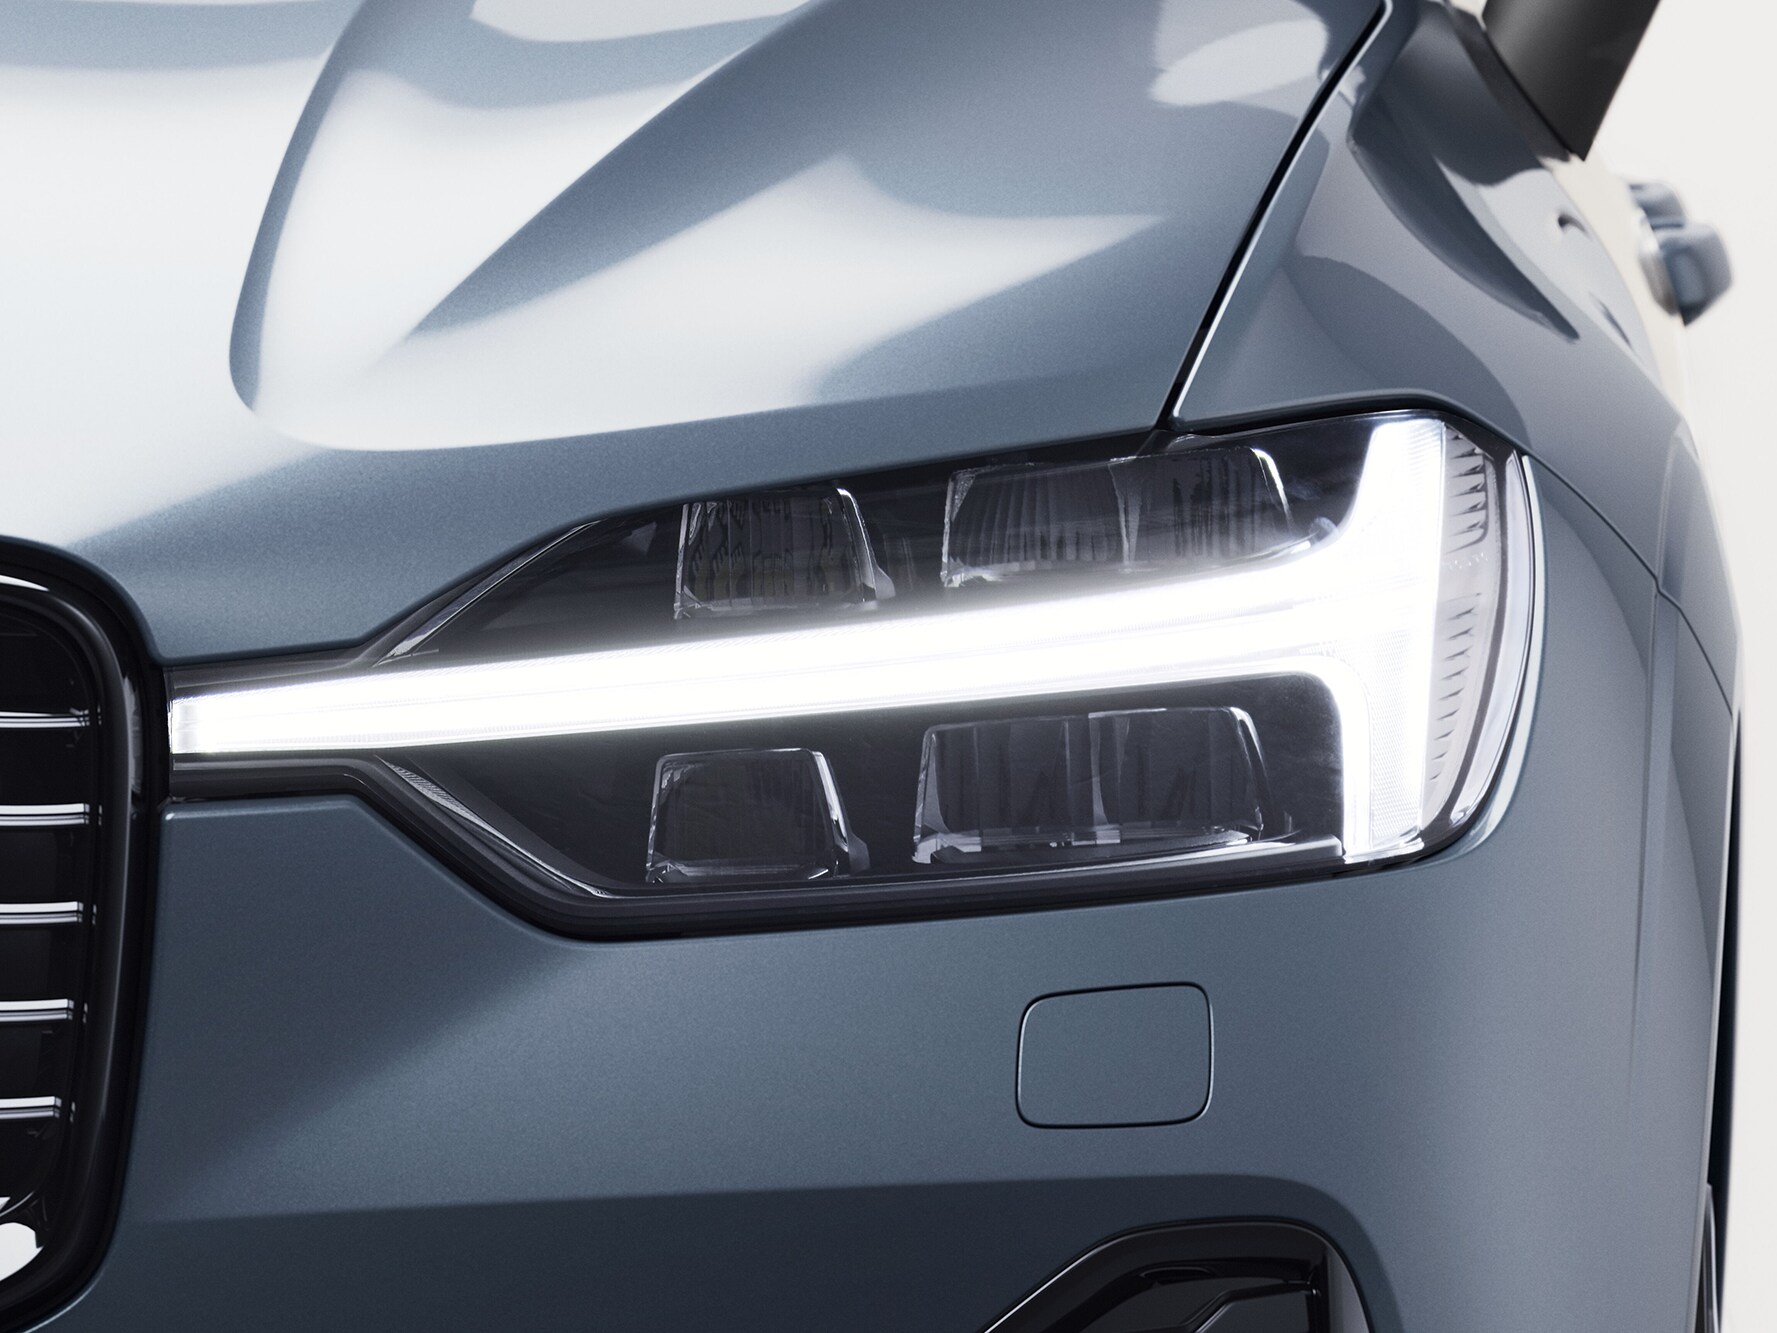 Front view of headlight of Volvo XC60 Recharge SUV